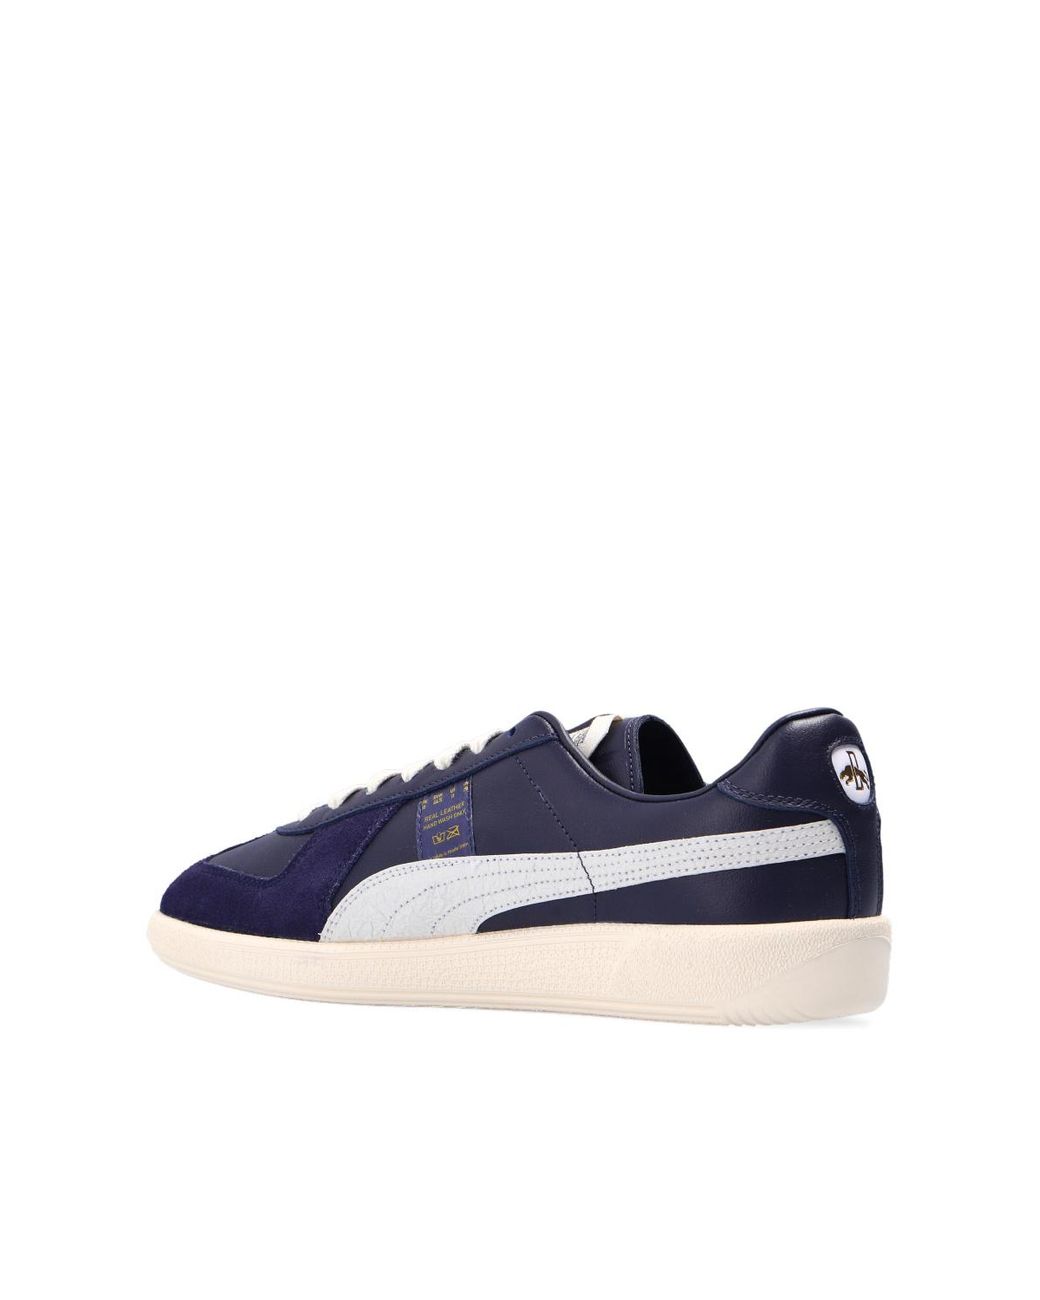 PUMA Leather 'the Rudolf Dassler Legacy' Collection in Navy Blue (Blue) for  Men | Lyst